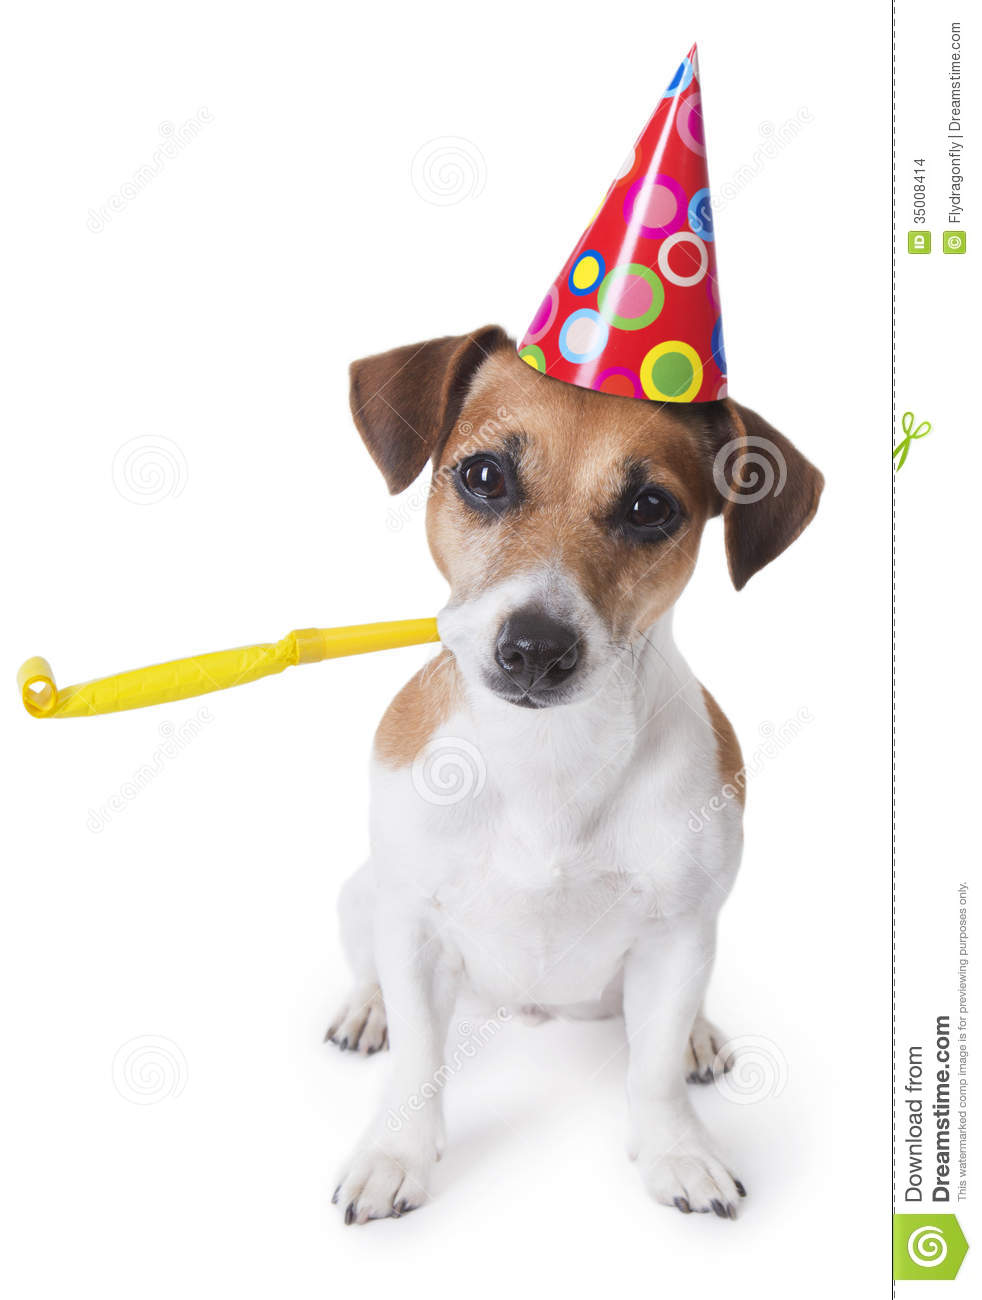 Cute Dog In Red Party Hat Designed Colored Circles With Yellow Party